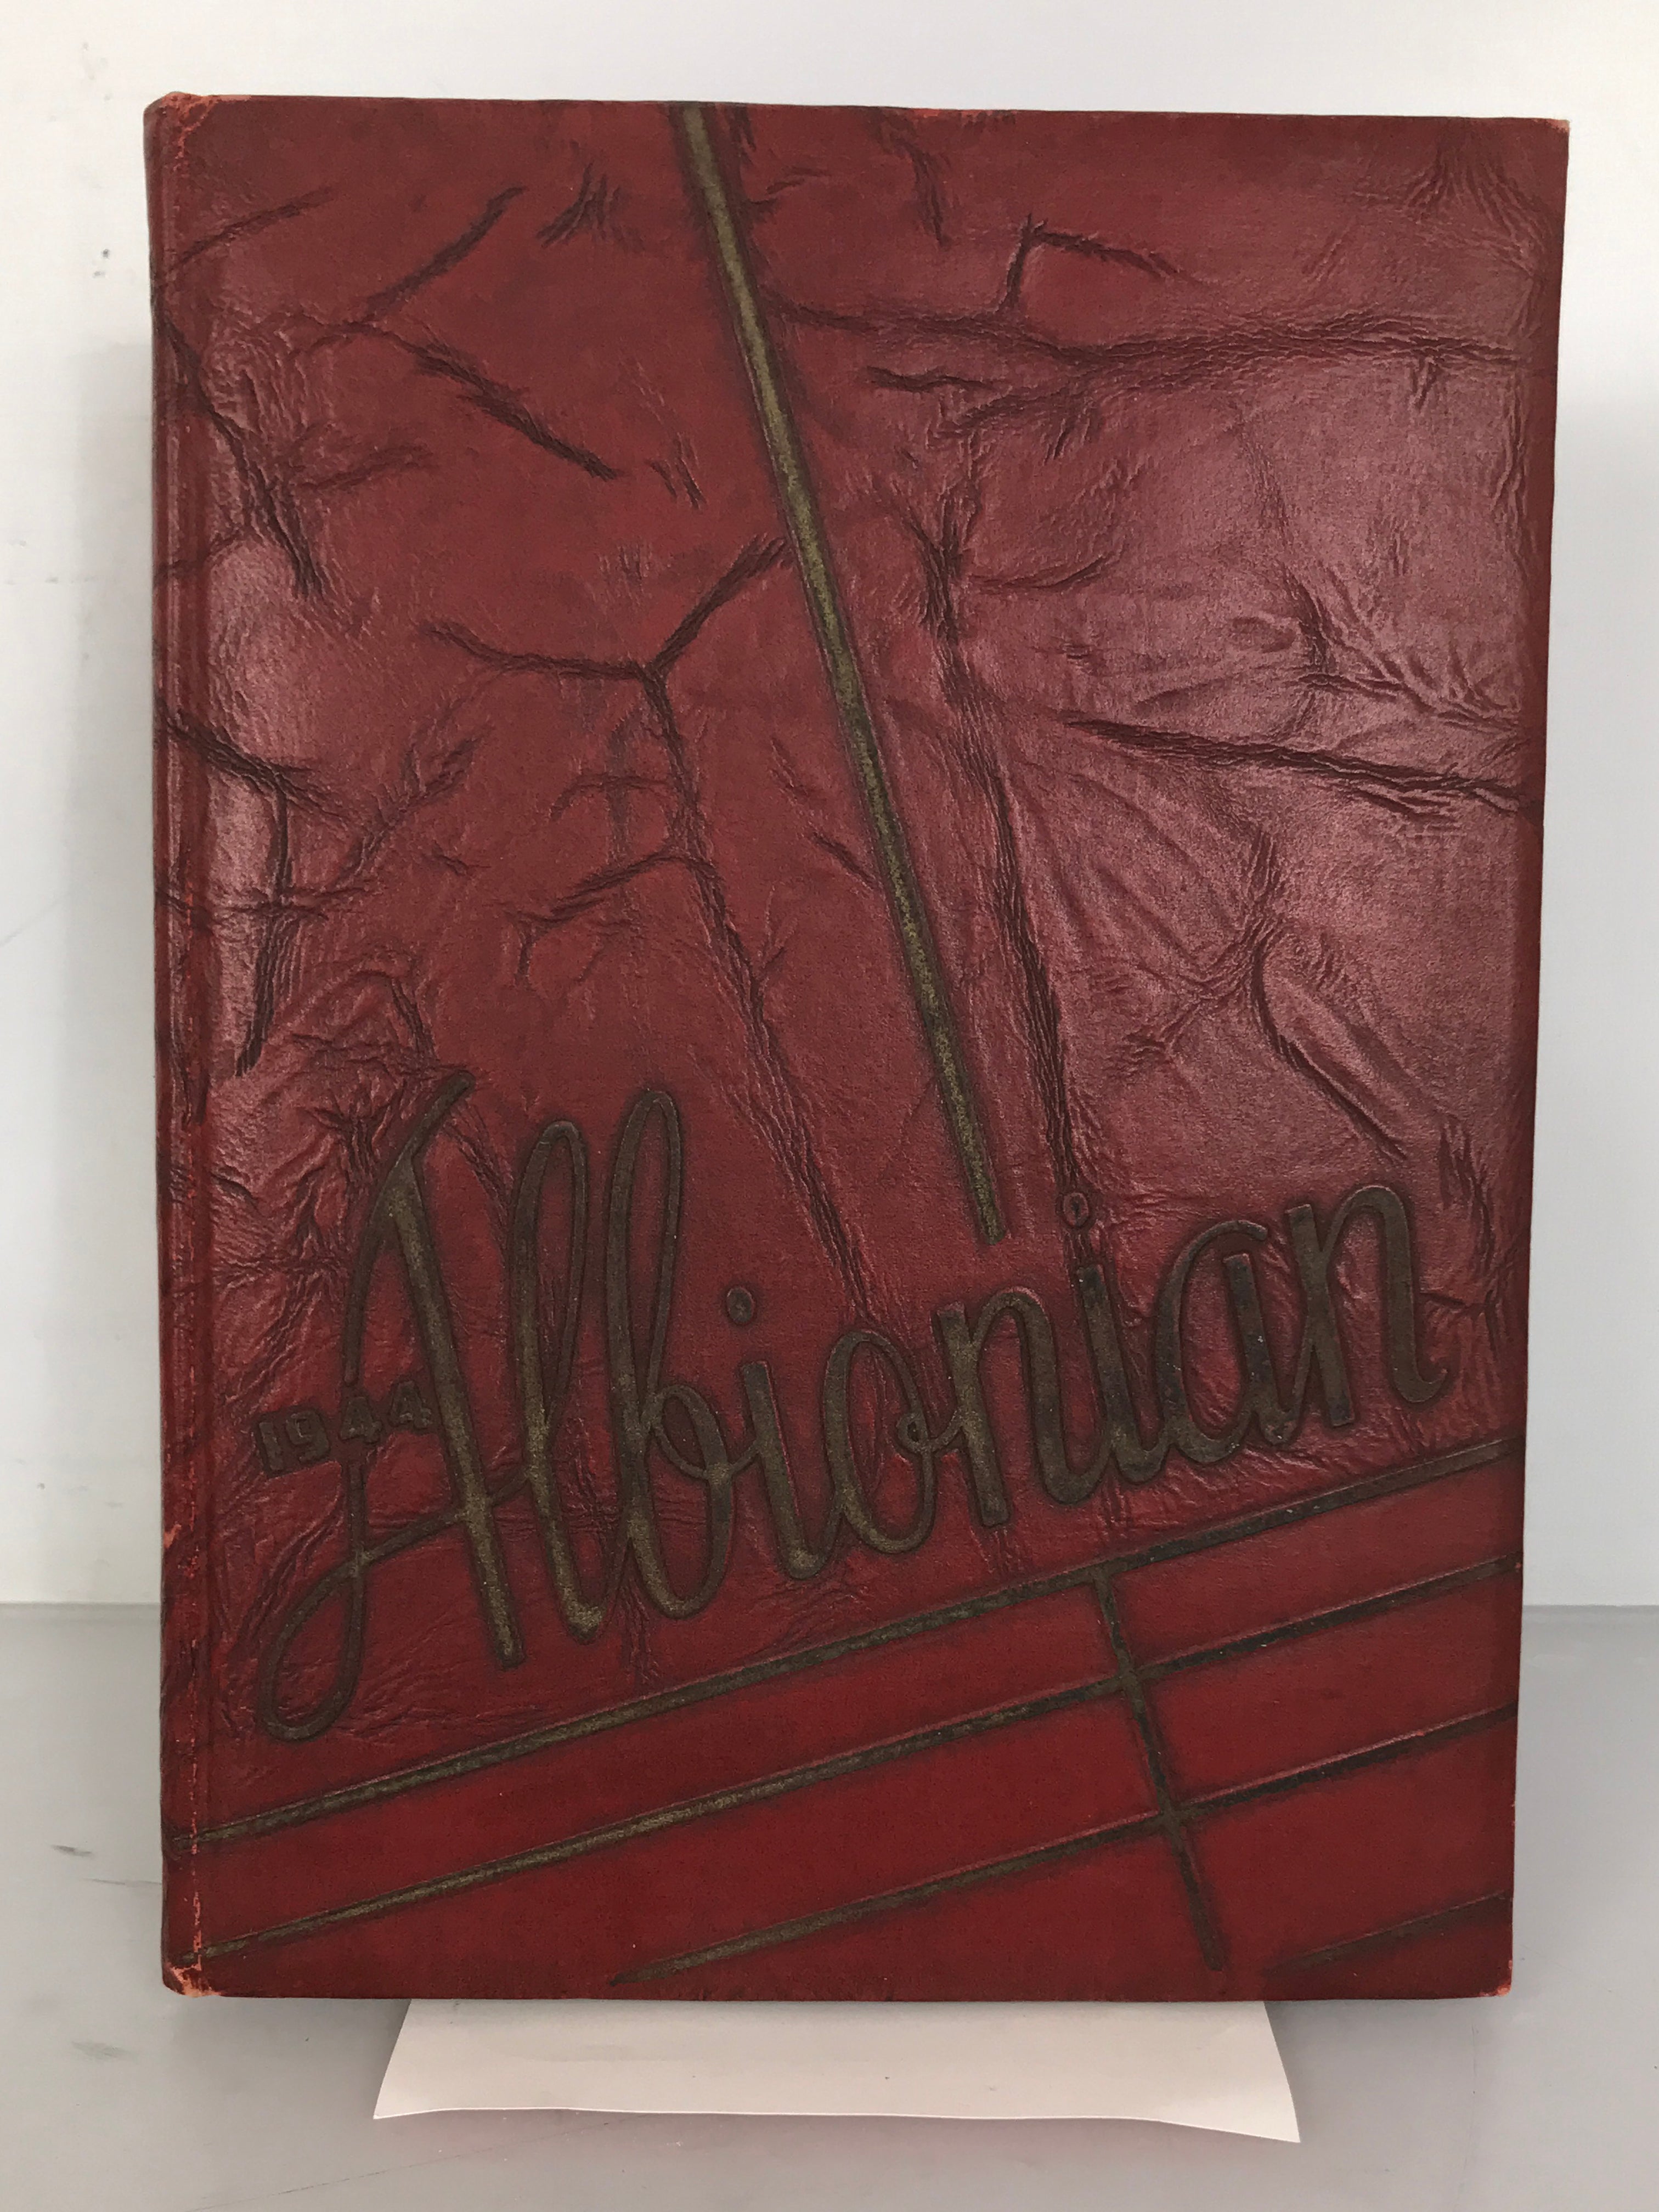 1944 Albion College Yearbook Albion Michigan HC